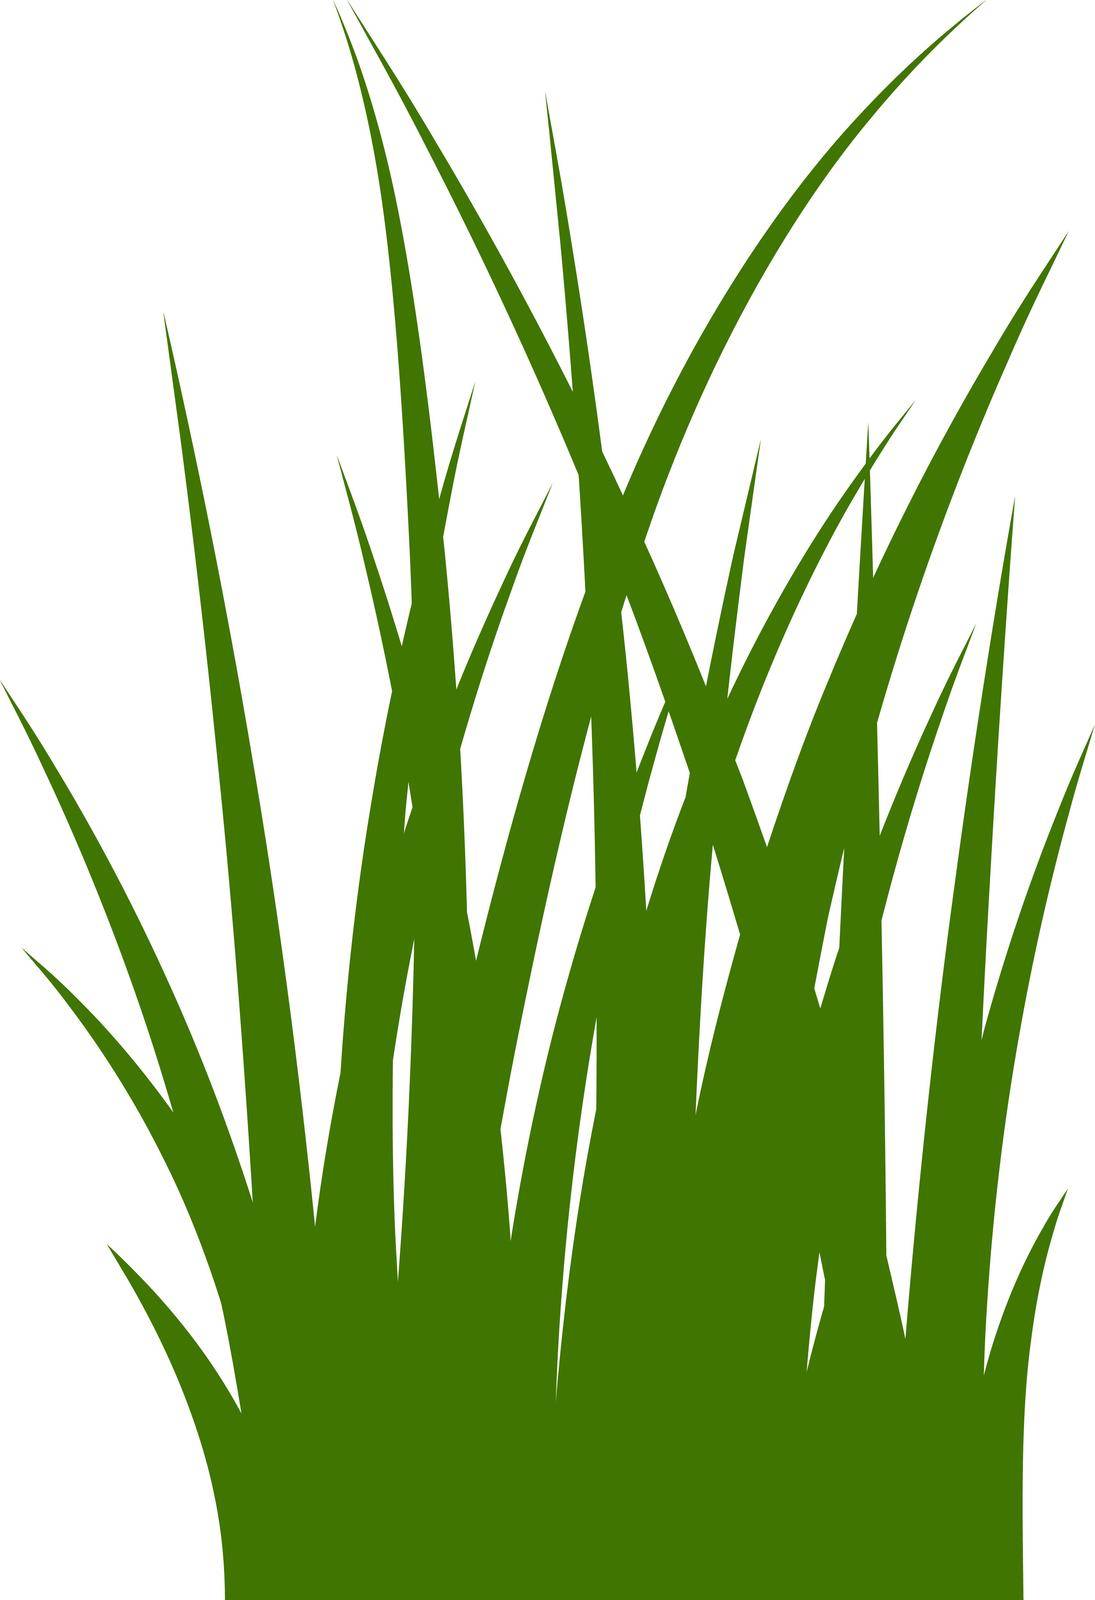 Green grass icon. Long blade leaves silhouette isolated on white background